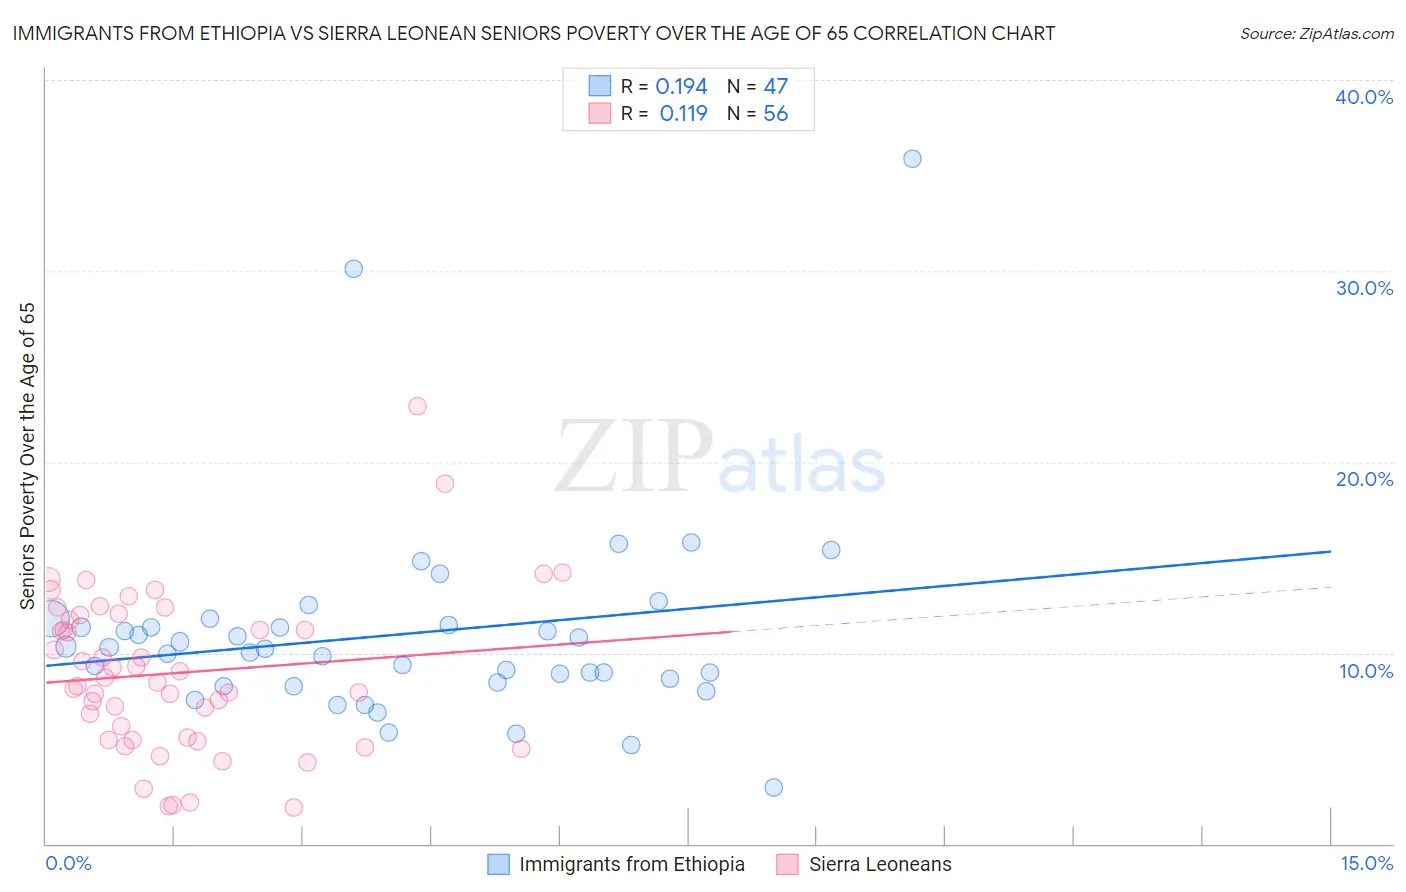 Immigrants from Ethiopia vs Sierra Leonean Seniors Poverty Over the Age of 65